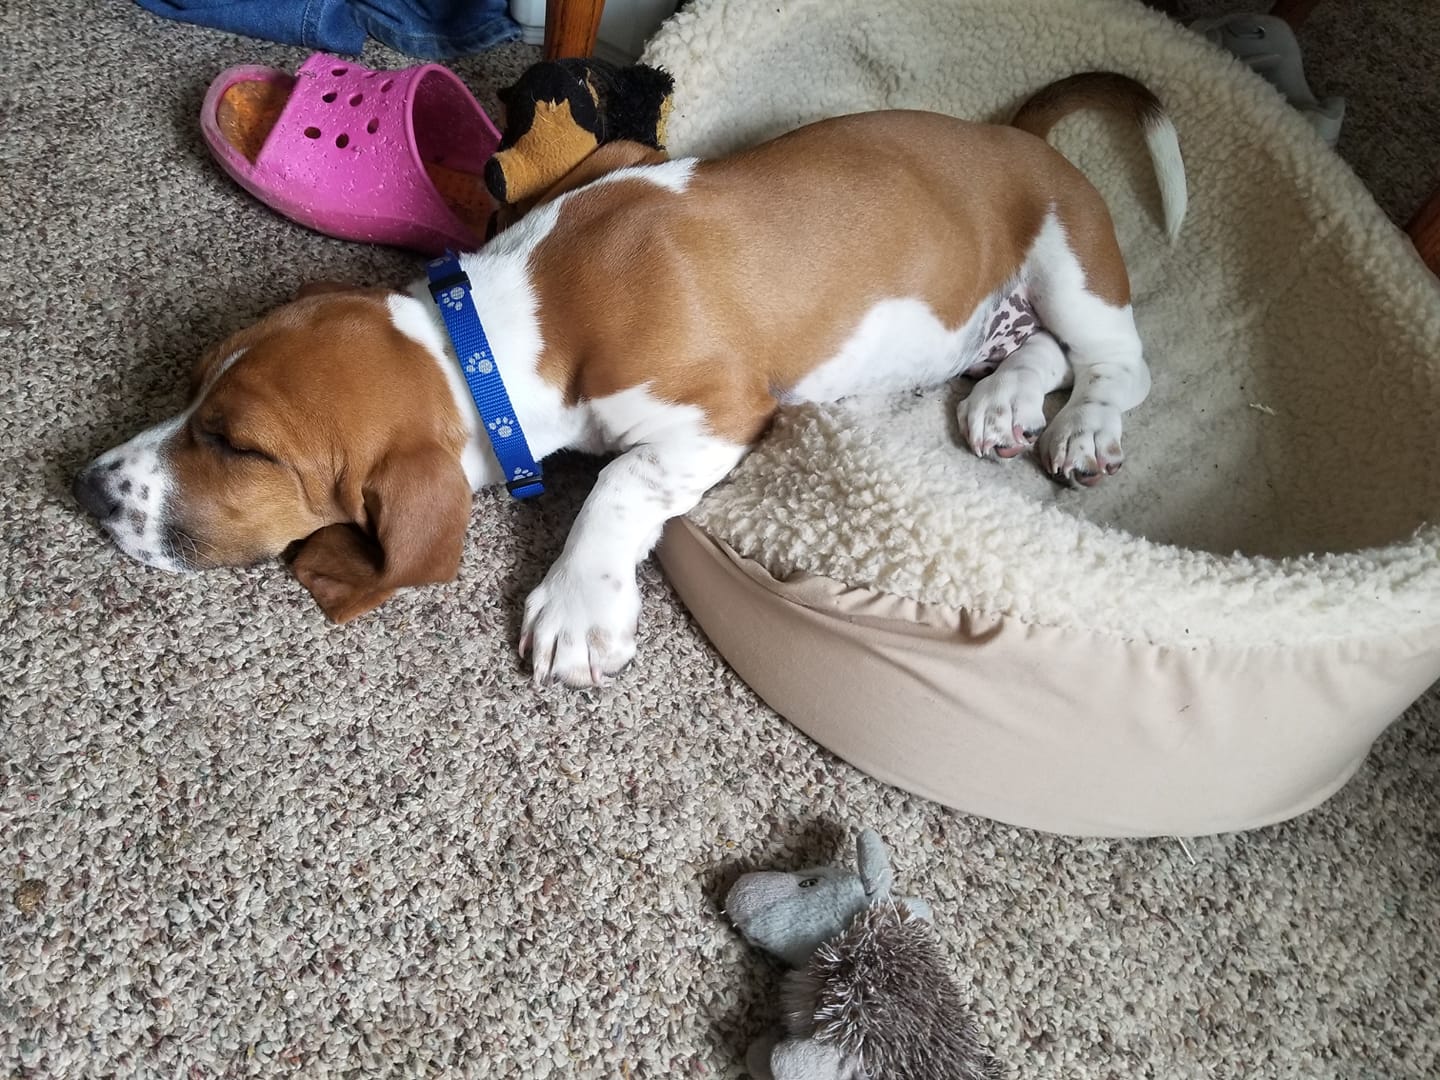 A Basset Hound puppy sleeping on its bed with its head and front legs are on the floor